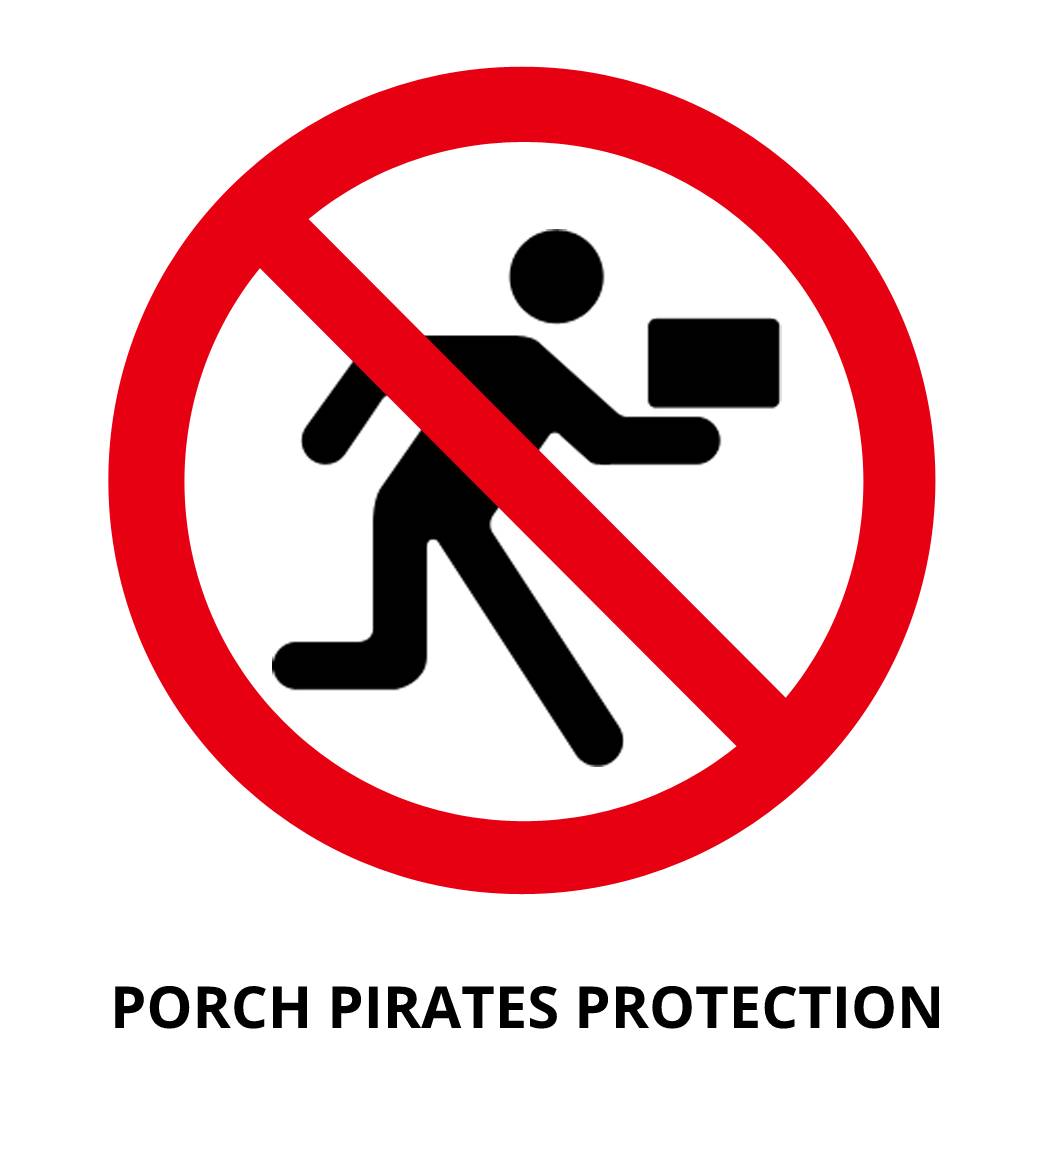 Porch Pirates Protection (wff)